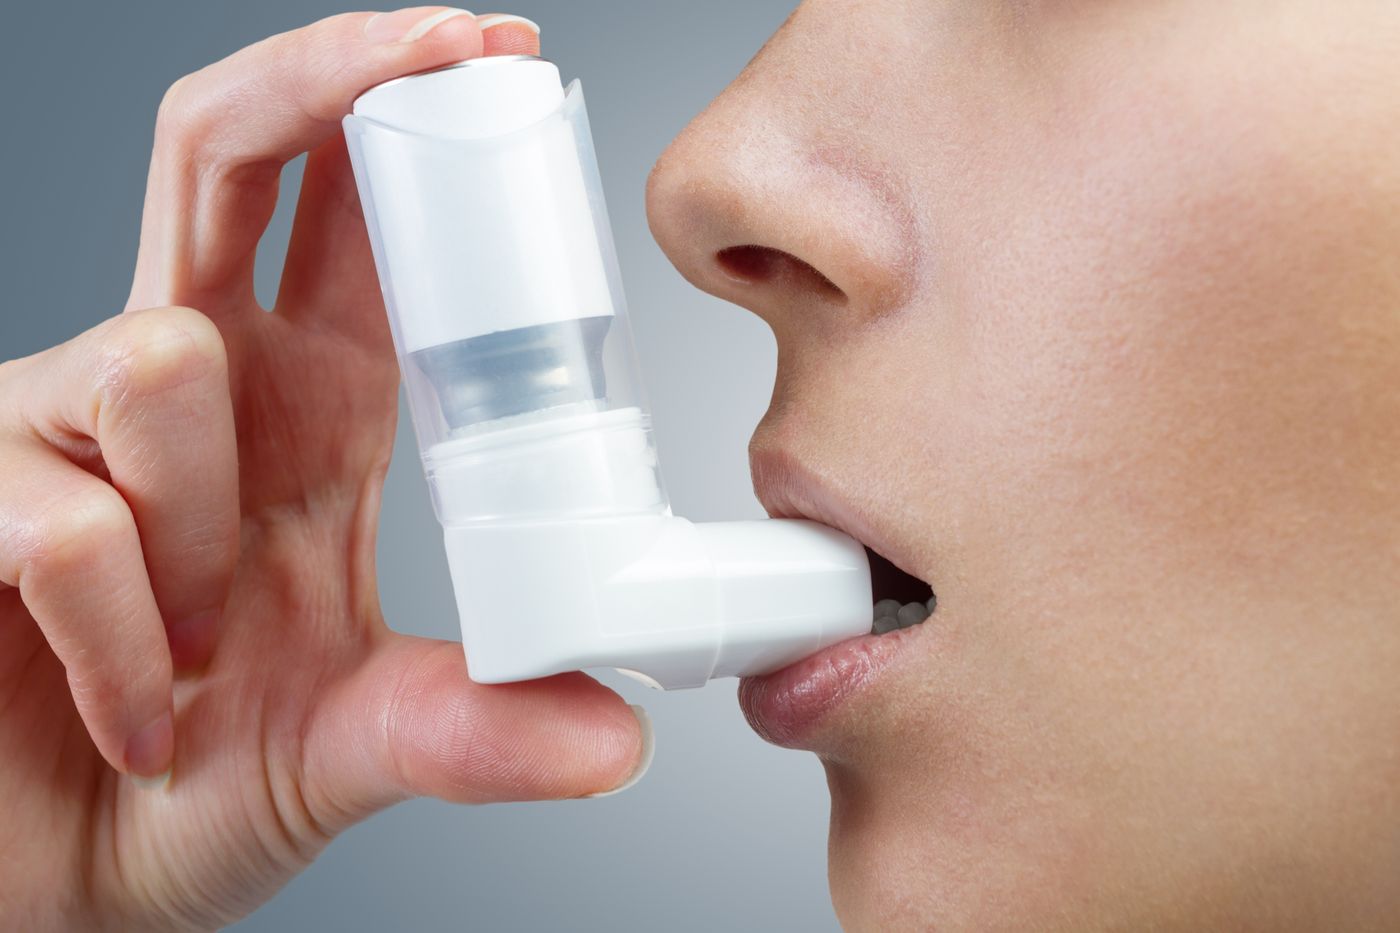 Four types of gut bacteria are linked with asthma